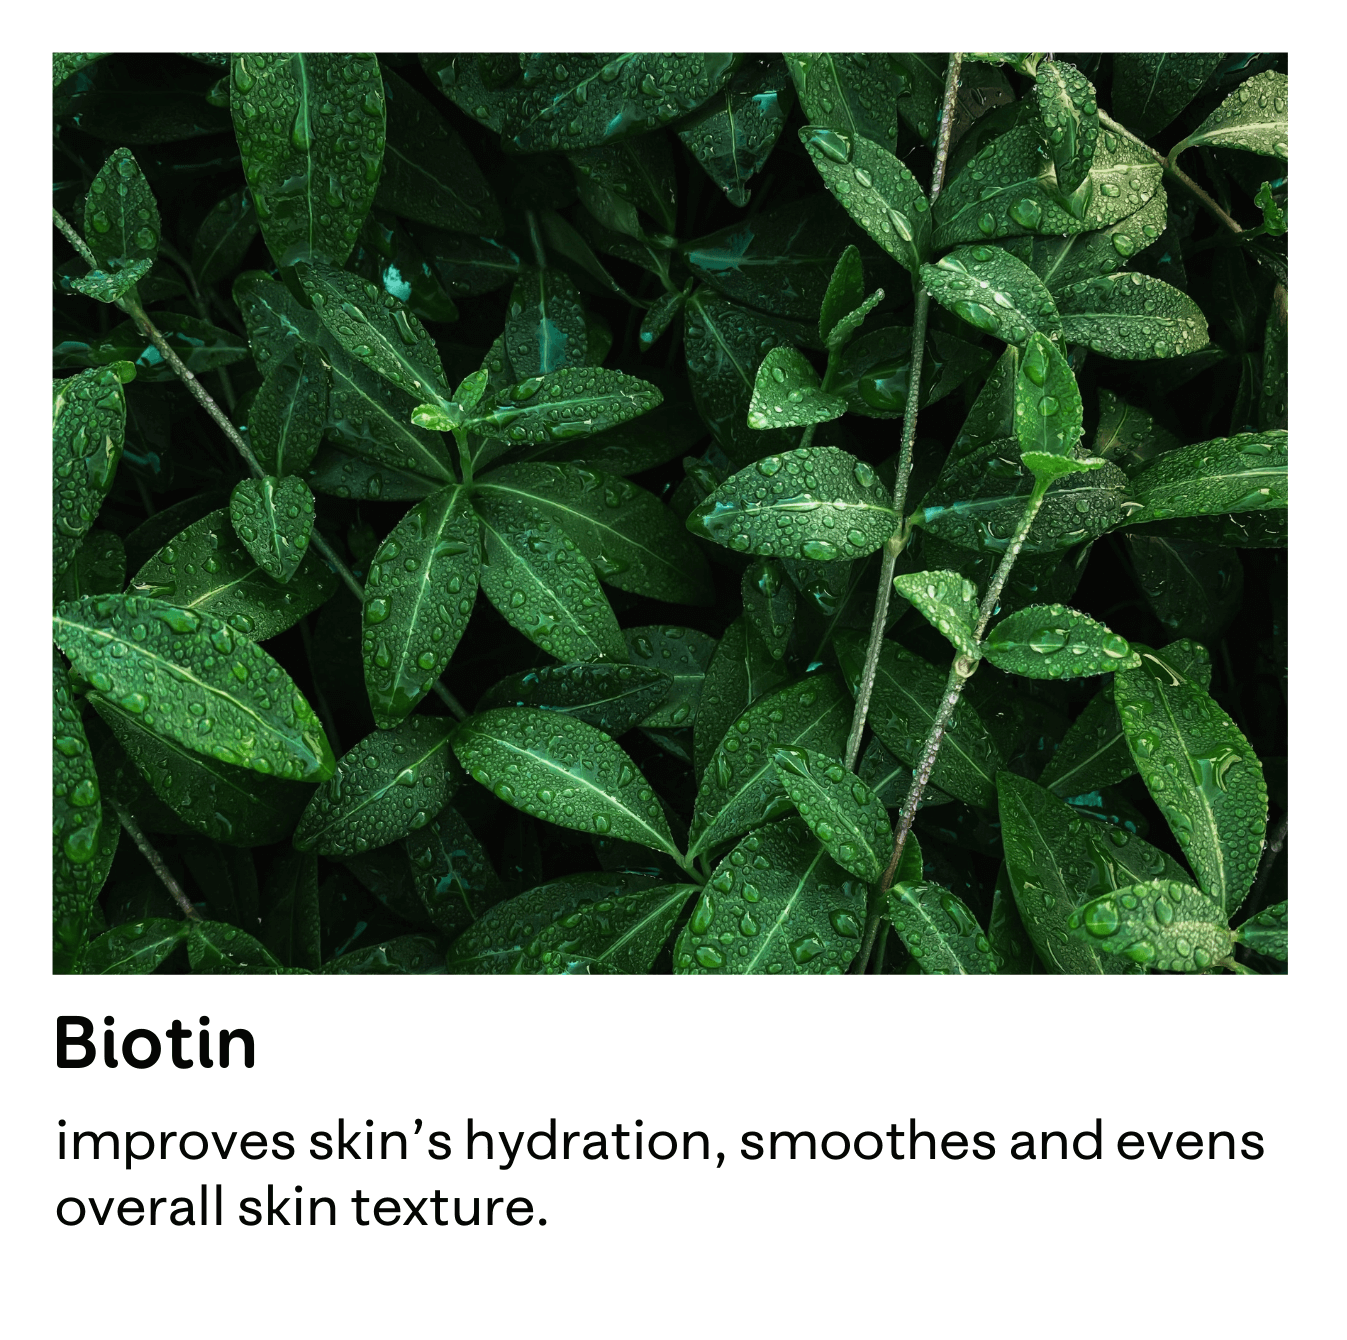 An image of biotin with information about the benefits it has for skincare purposes.